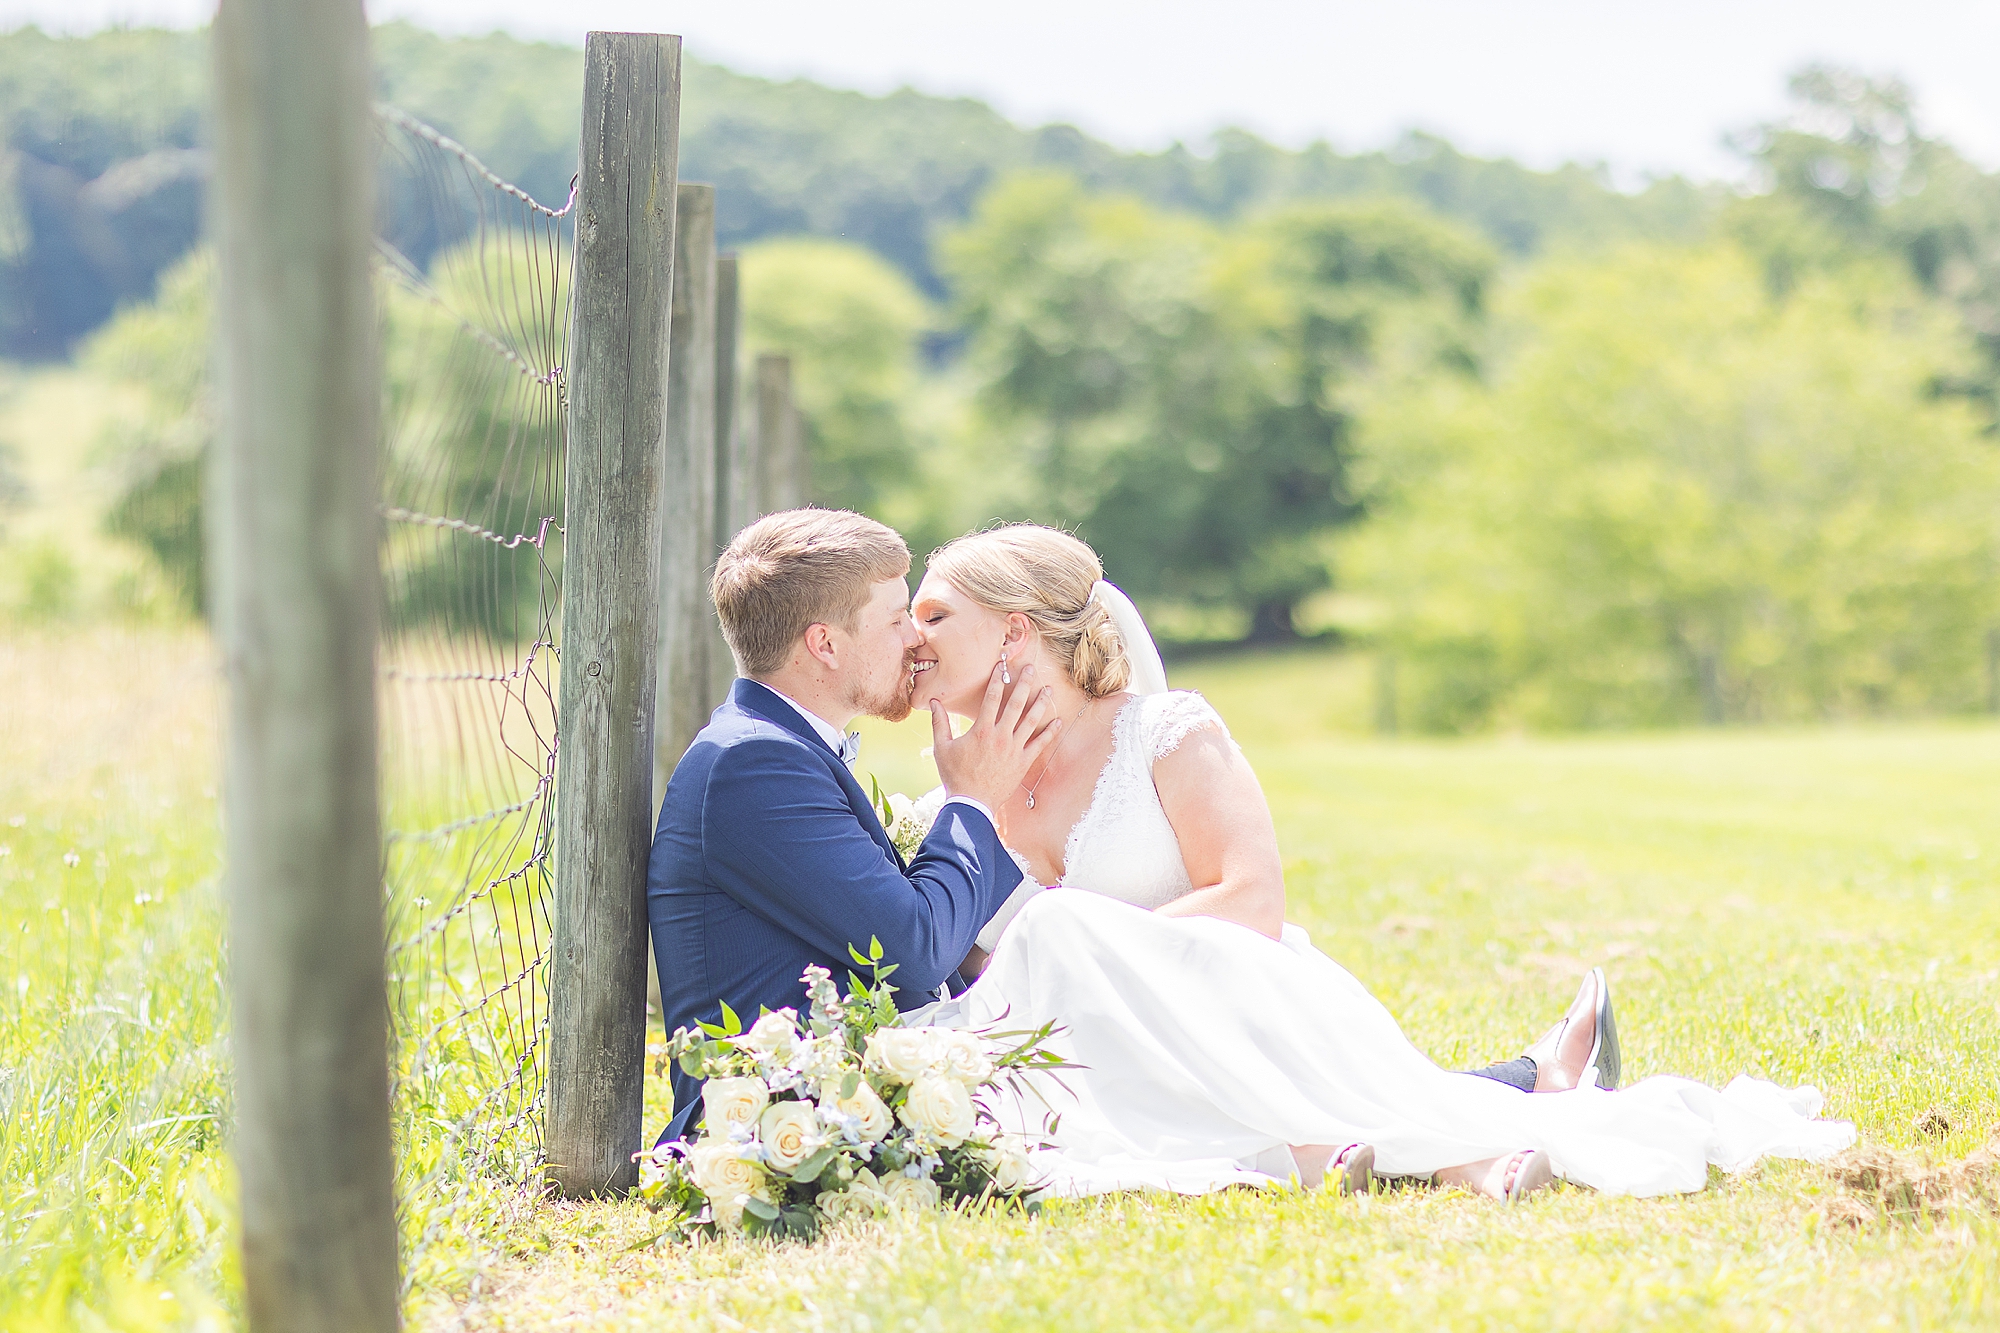 newlyweds kiss against wooden fence post